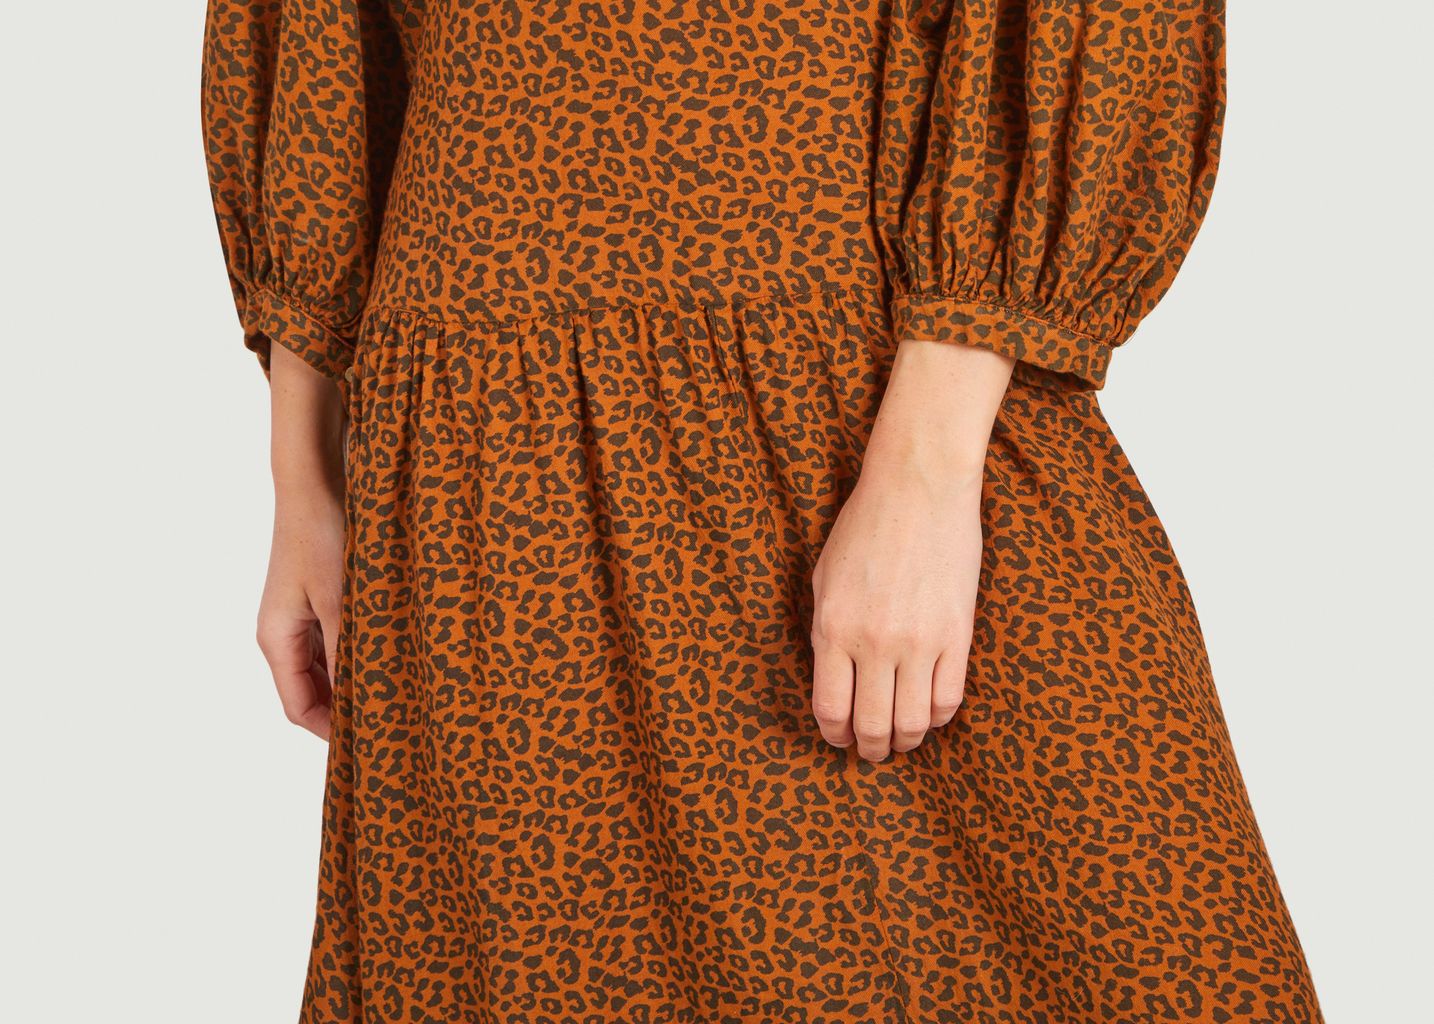 Leopard print long dress in organic cotton Federica - The new society